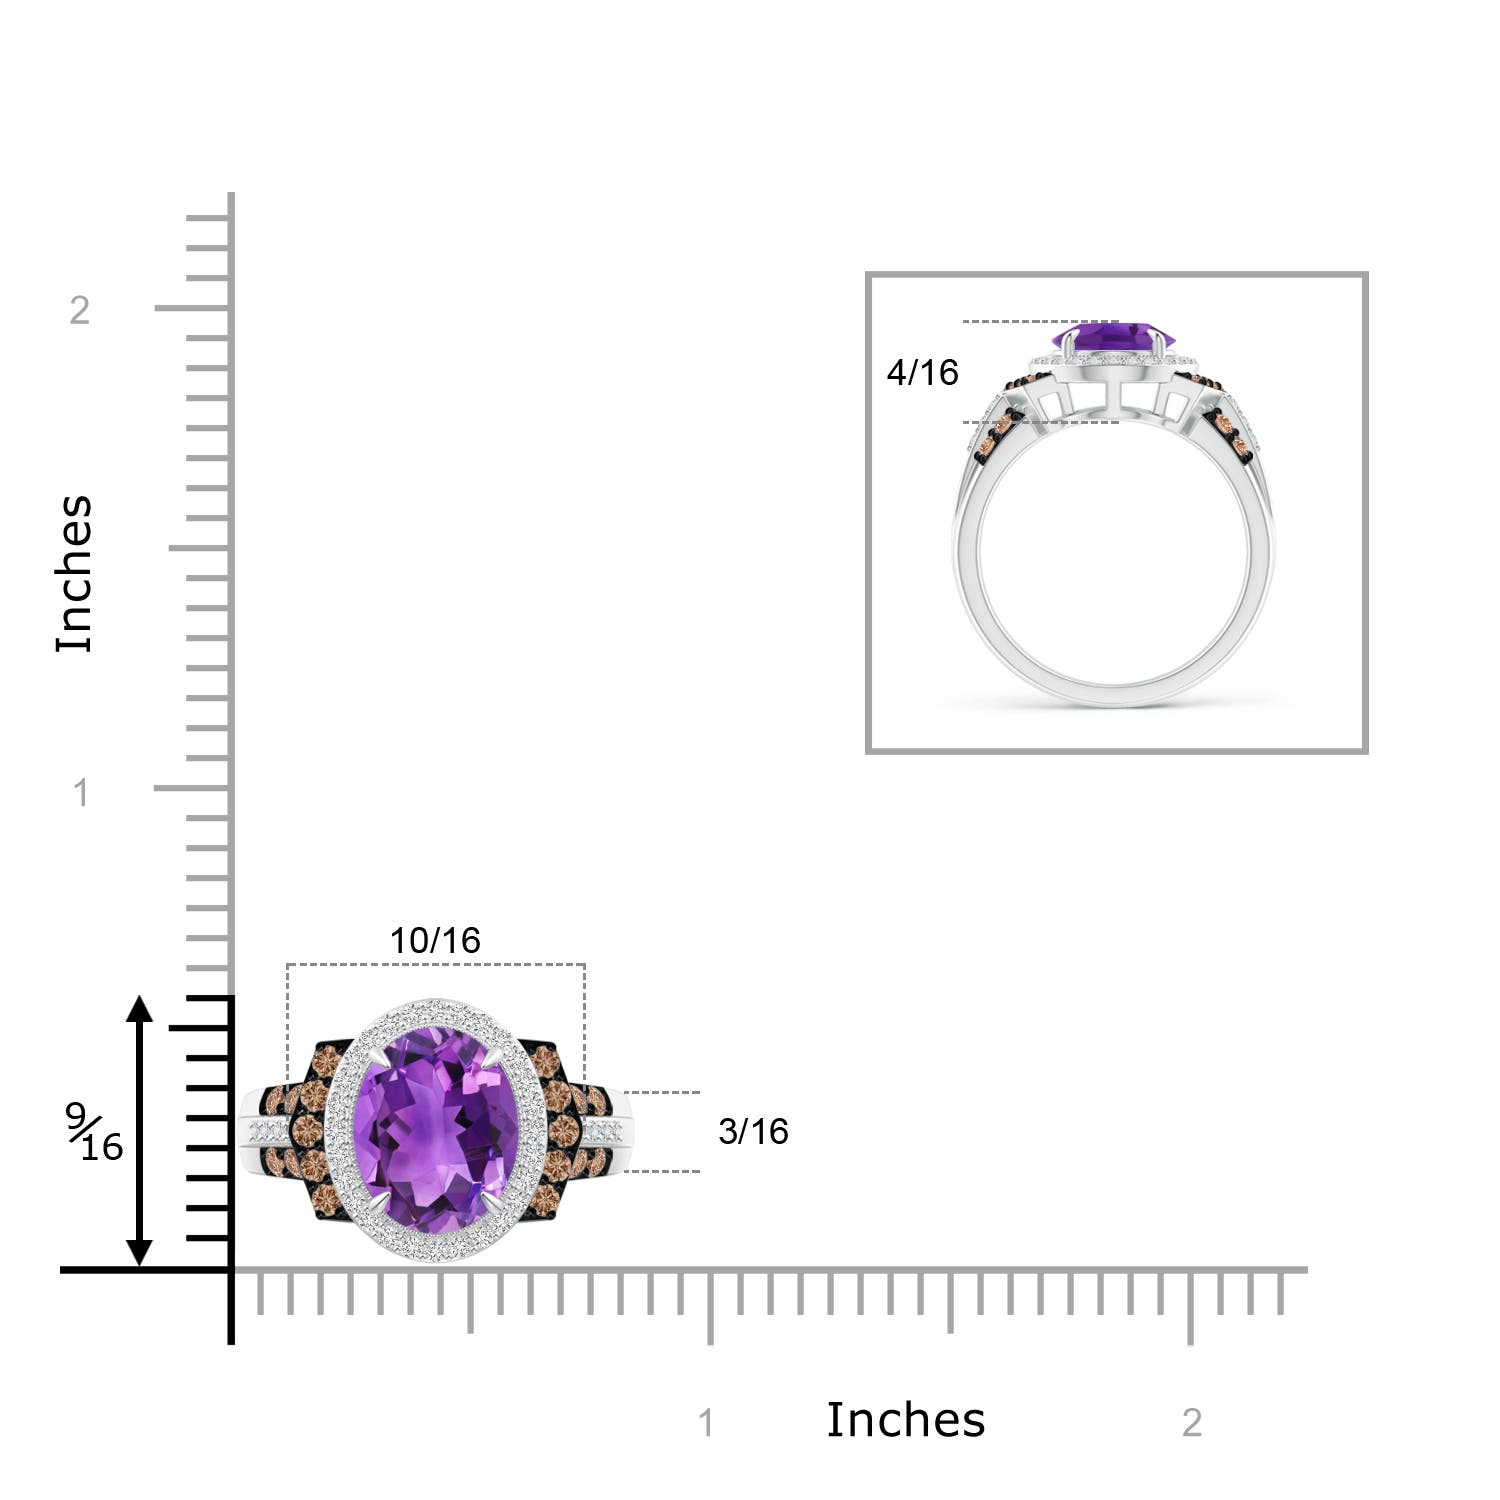 AAA - Amethyst / 2.81 CT / 14 KT White Gold